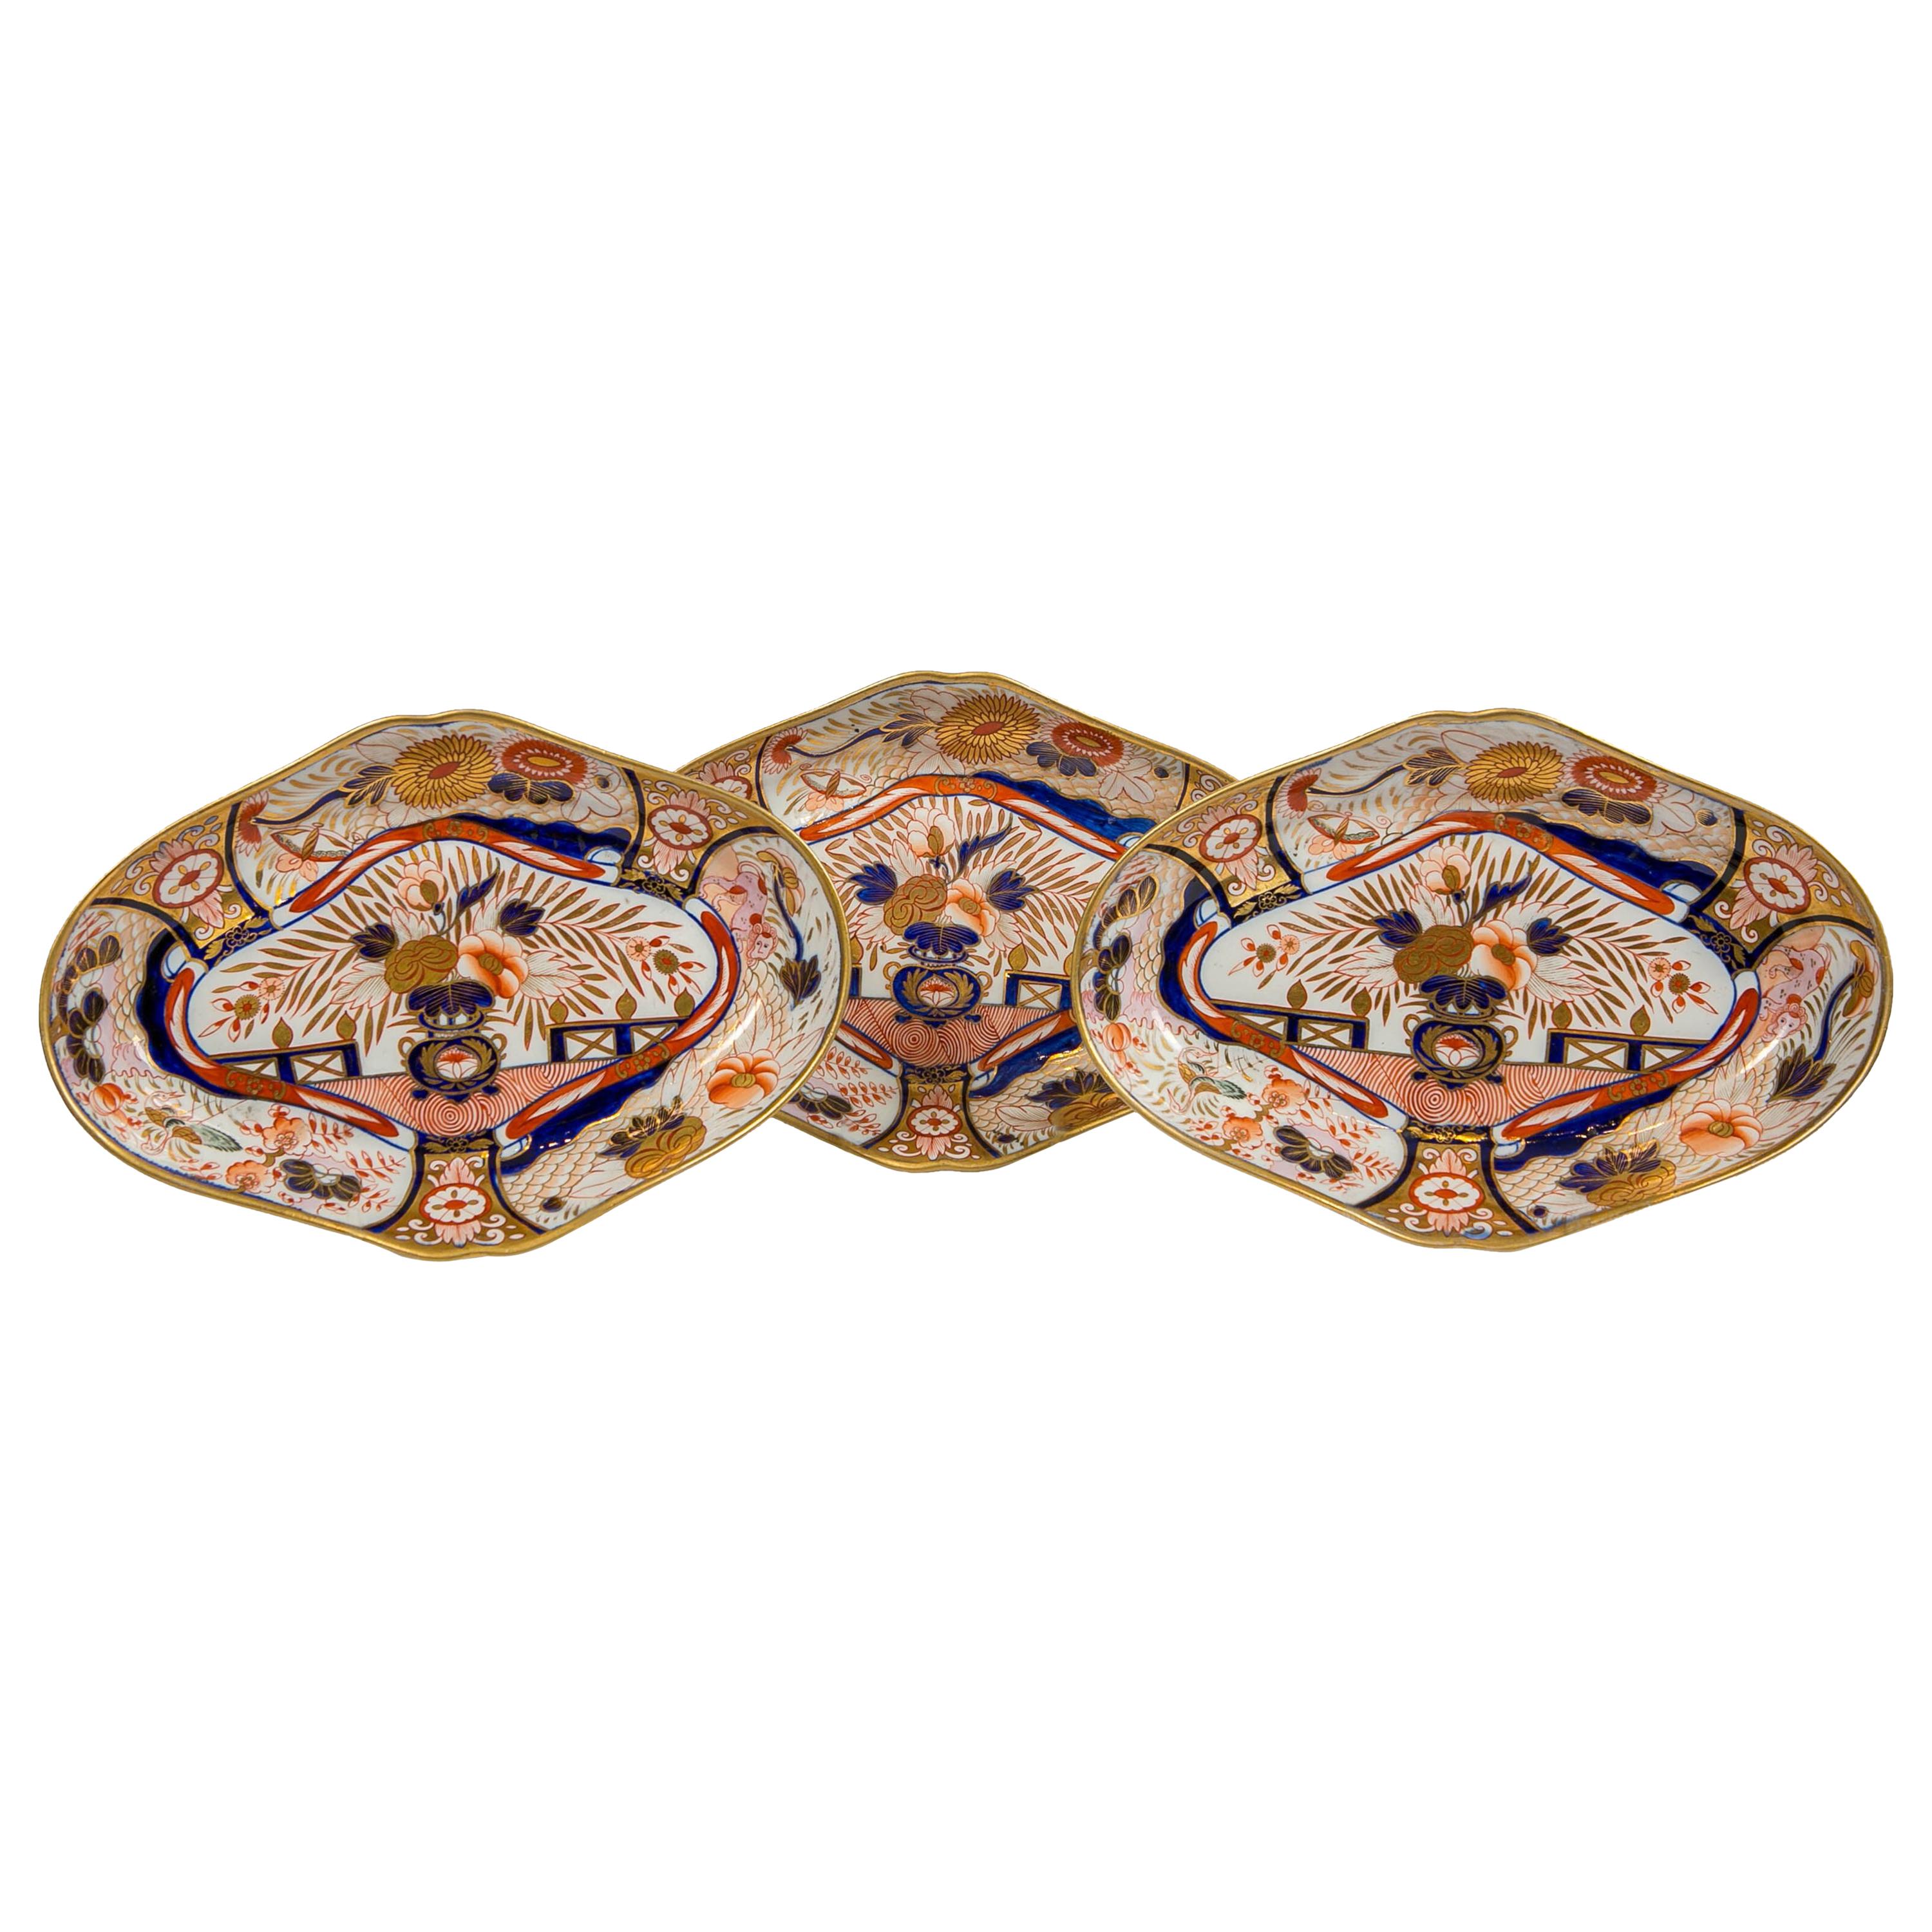 Coalport Admiral Nelson Pattern Oval Dishes, England, circa 1810